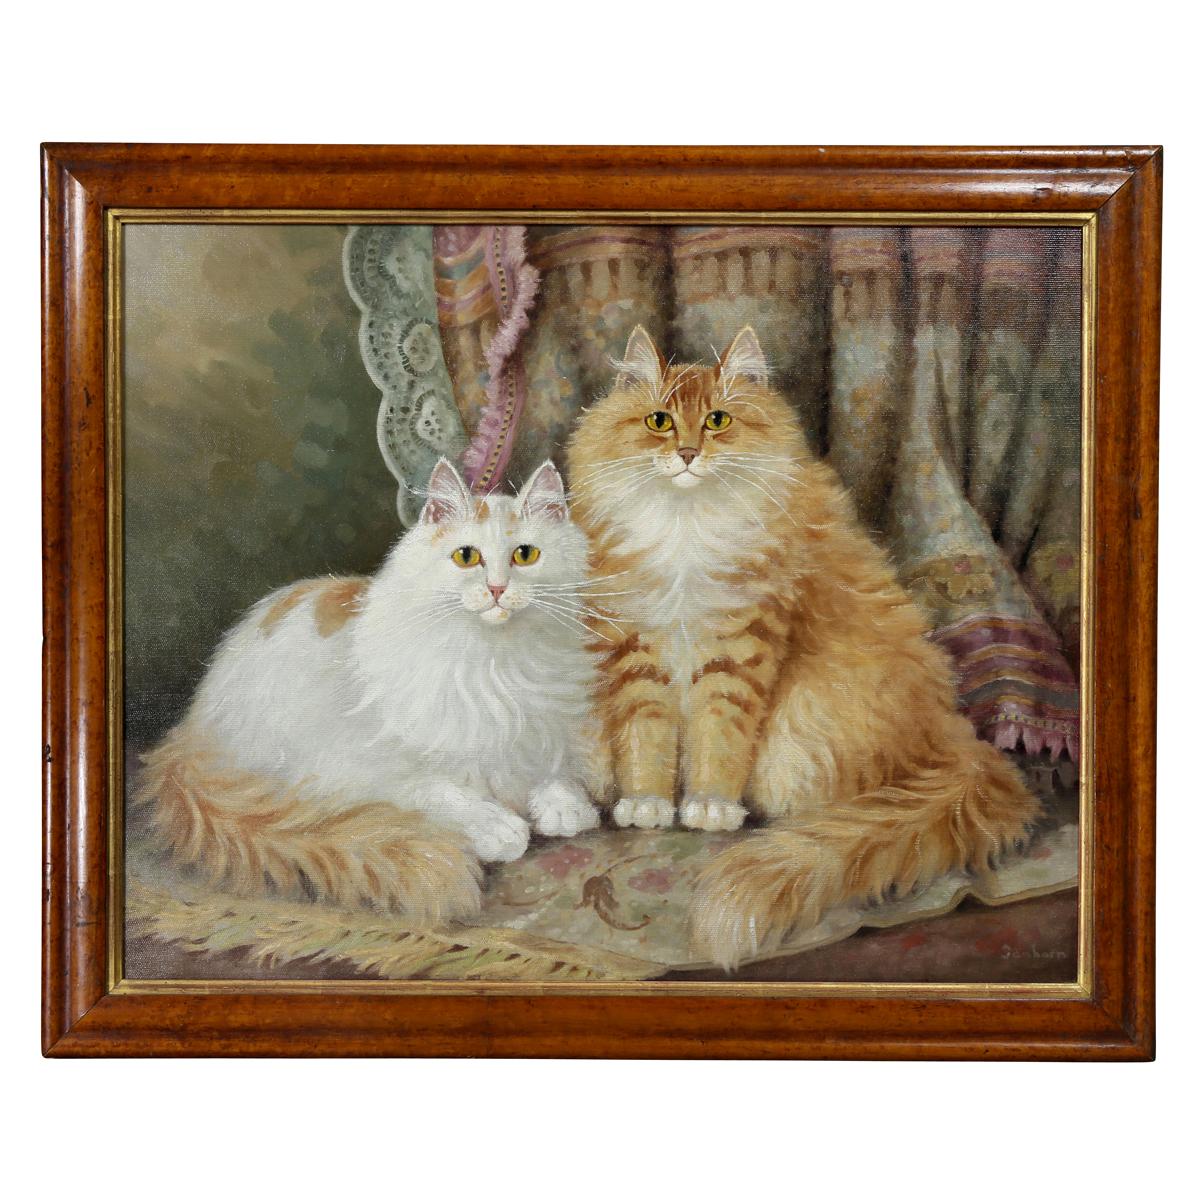 Oil on Panel Painting of Two Cats by Percy S Sanborn